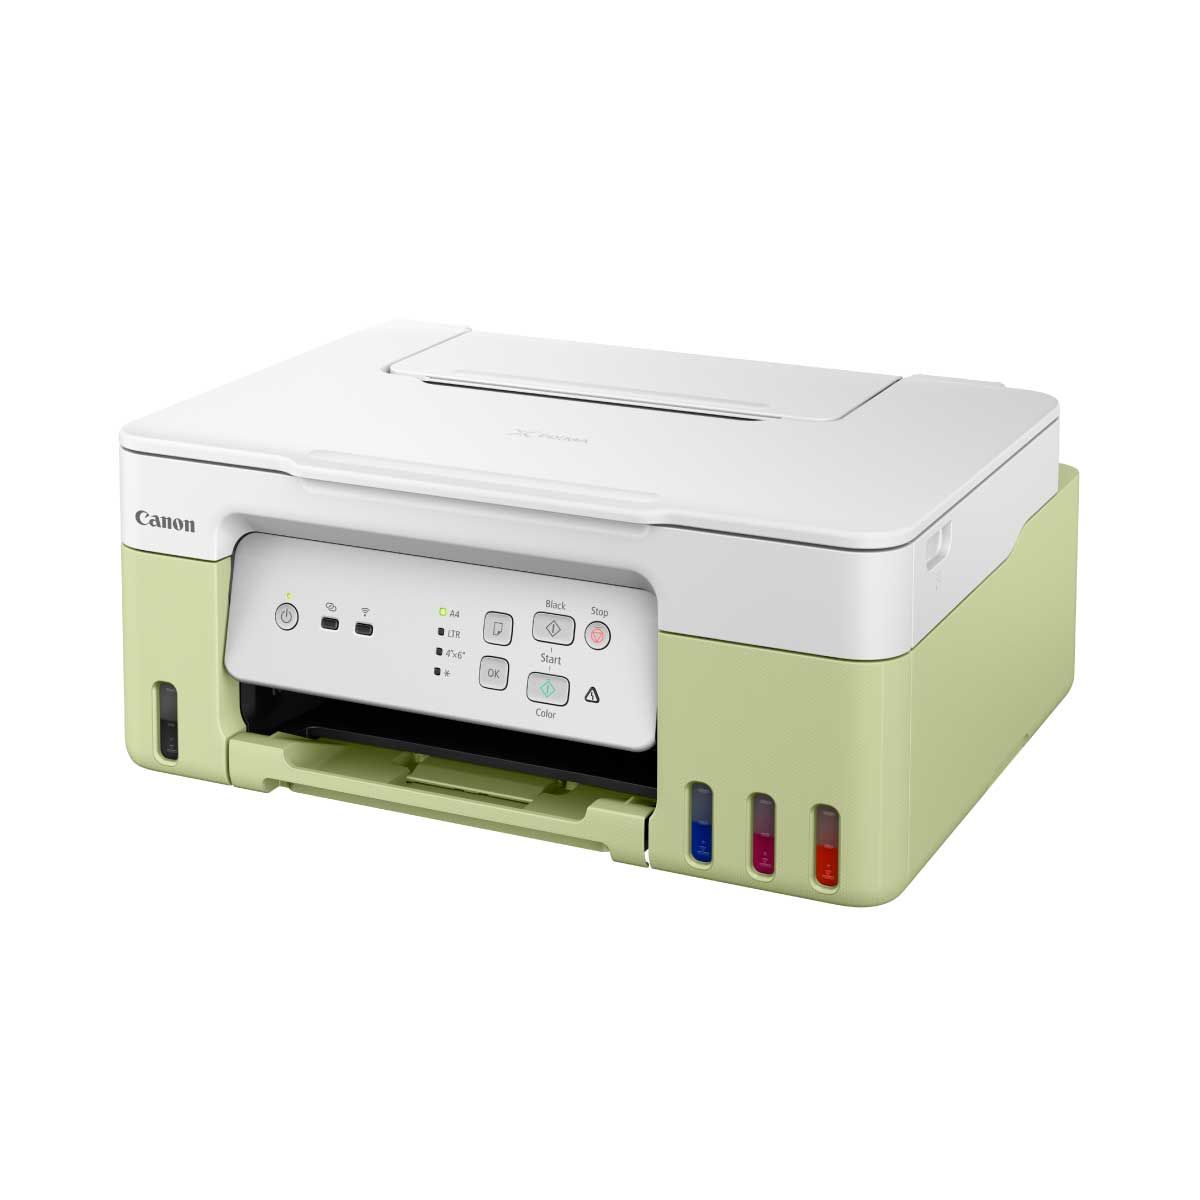 PRINTER (เครื่องพิมพ์) CANON PIXMA G3730 ALL-IN-ONE (YELLOW-GREEN)